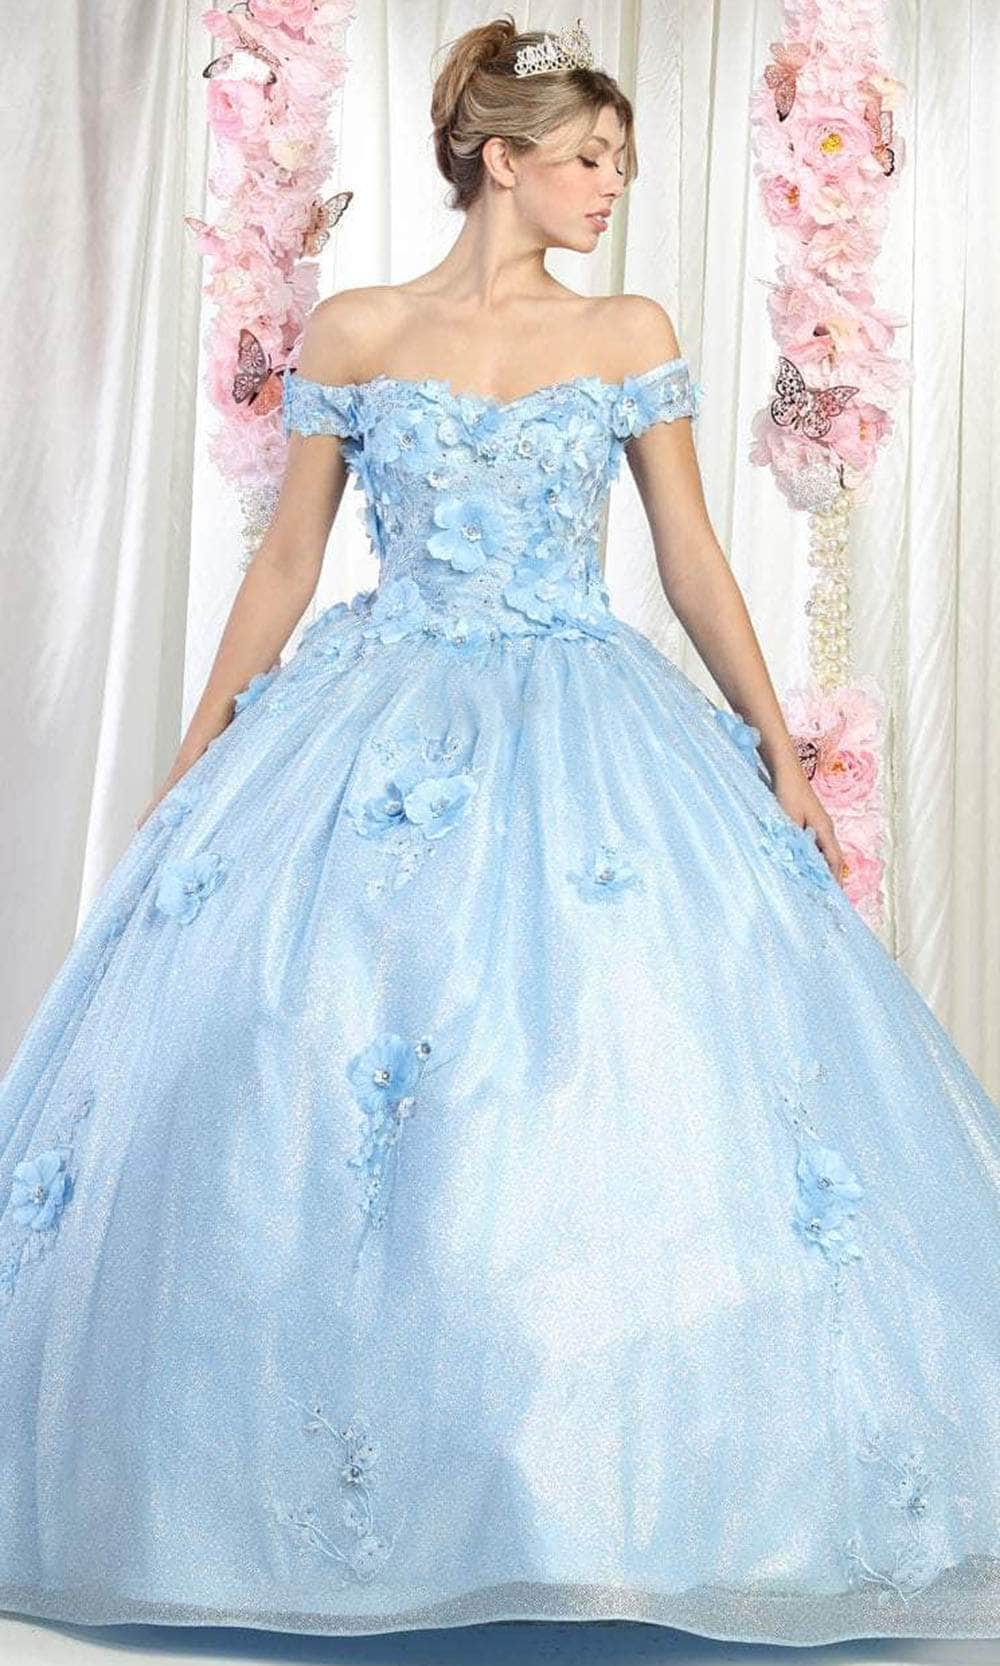 Image of May Queen LK161 - Off Shoulder Floral Prom Ballgown